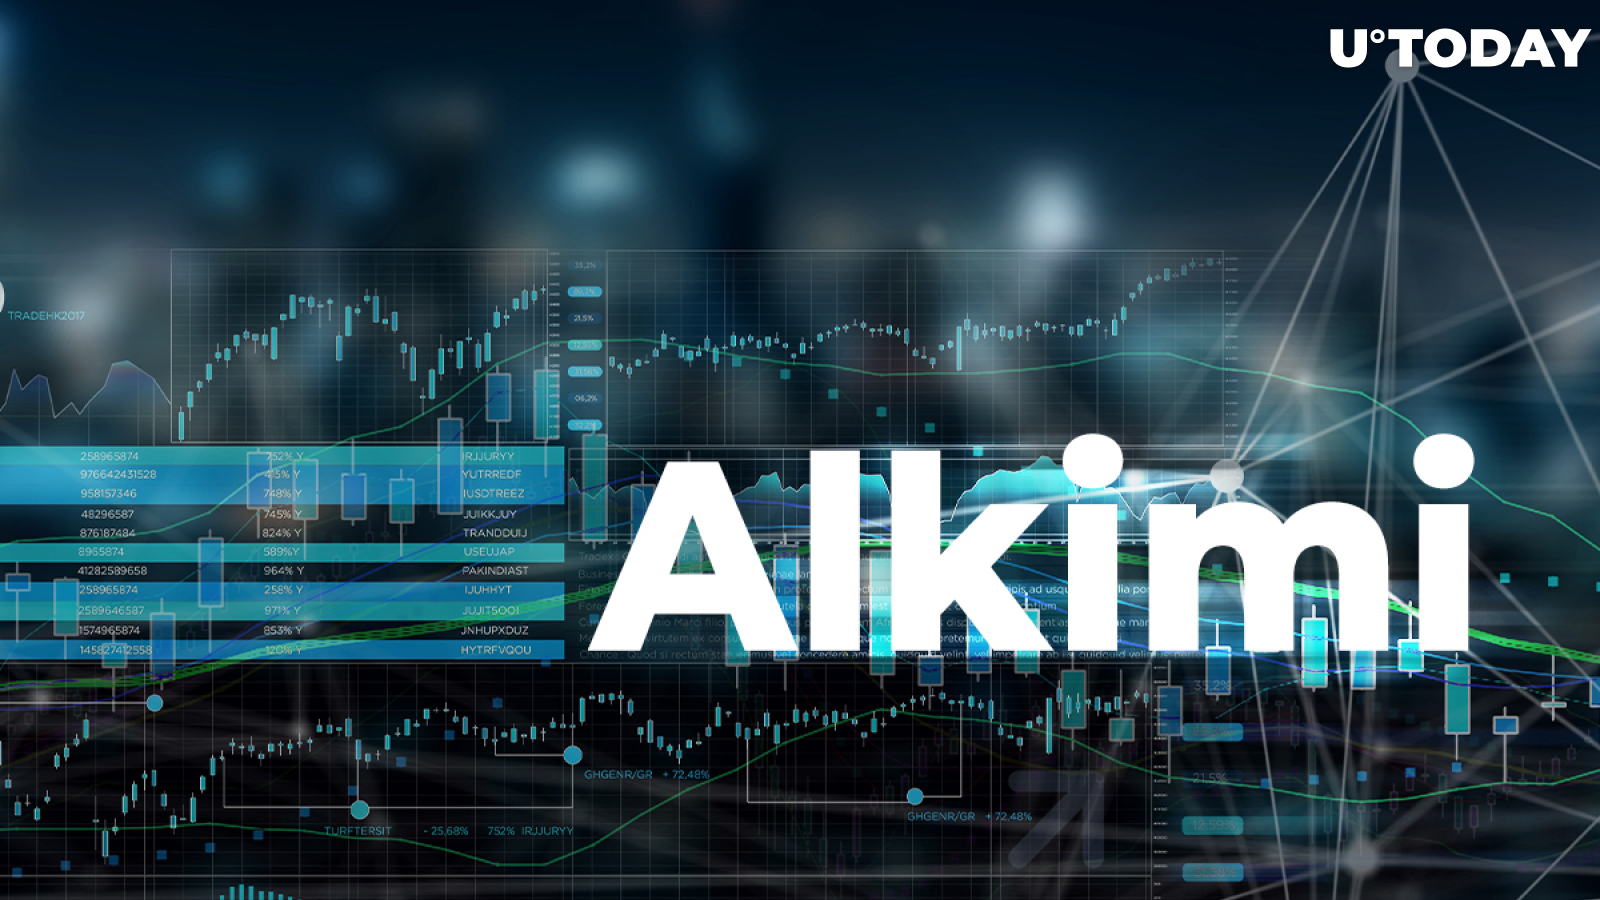 Alkimi Releases Decentralized Ad Exchange on Constellation's Hypergraph